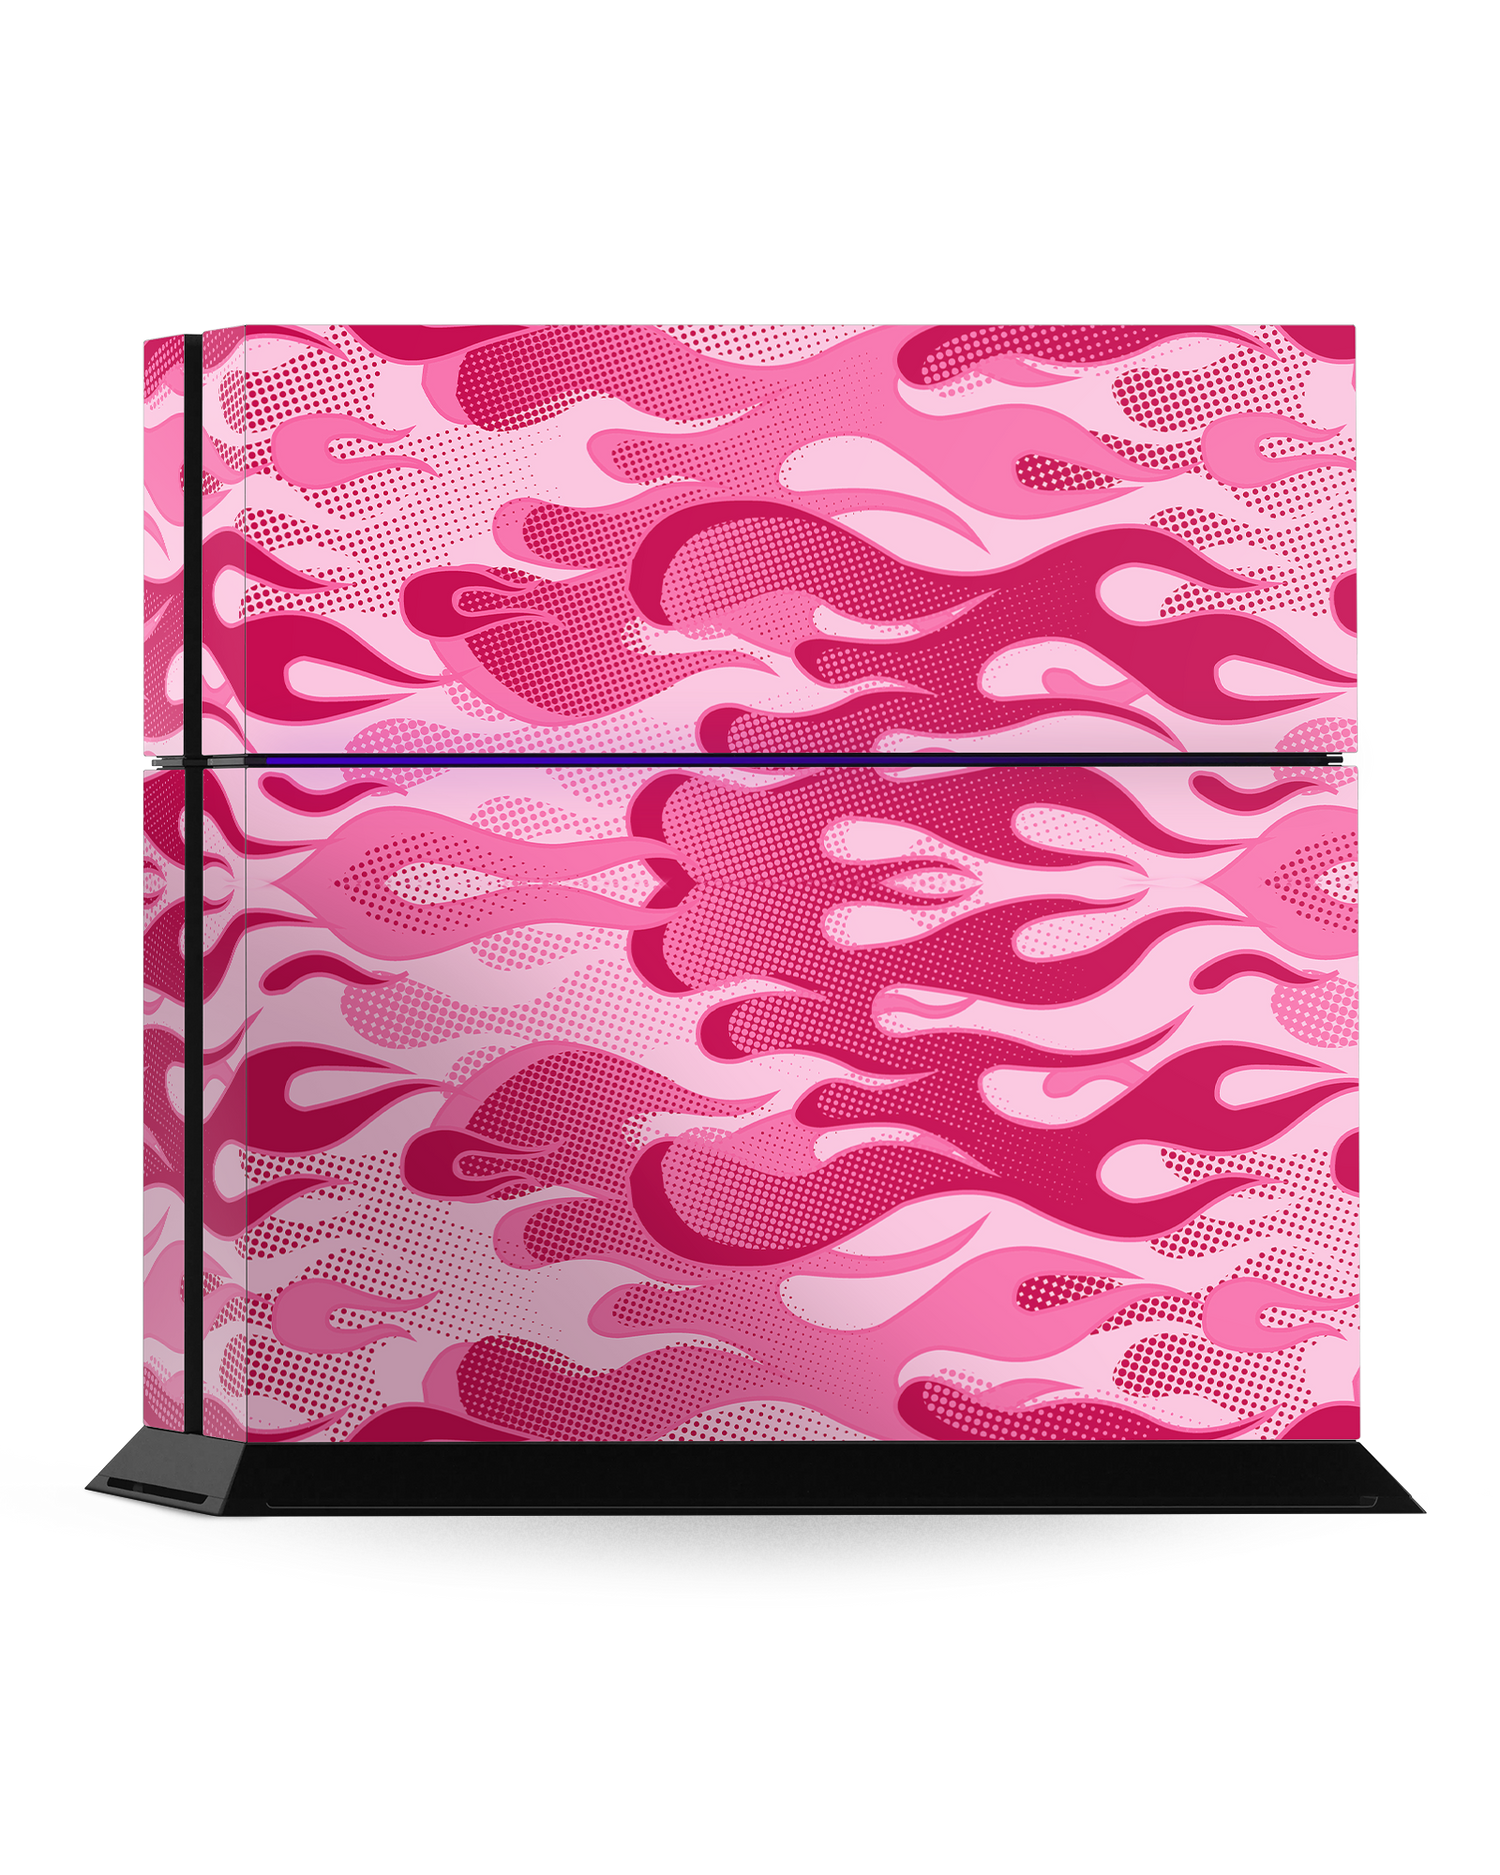 Pink Flames Console Skin for Sony PlayStation 4: Standing